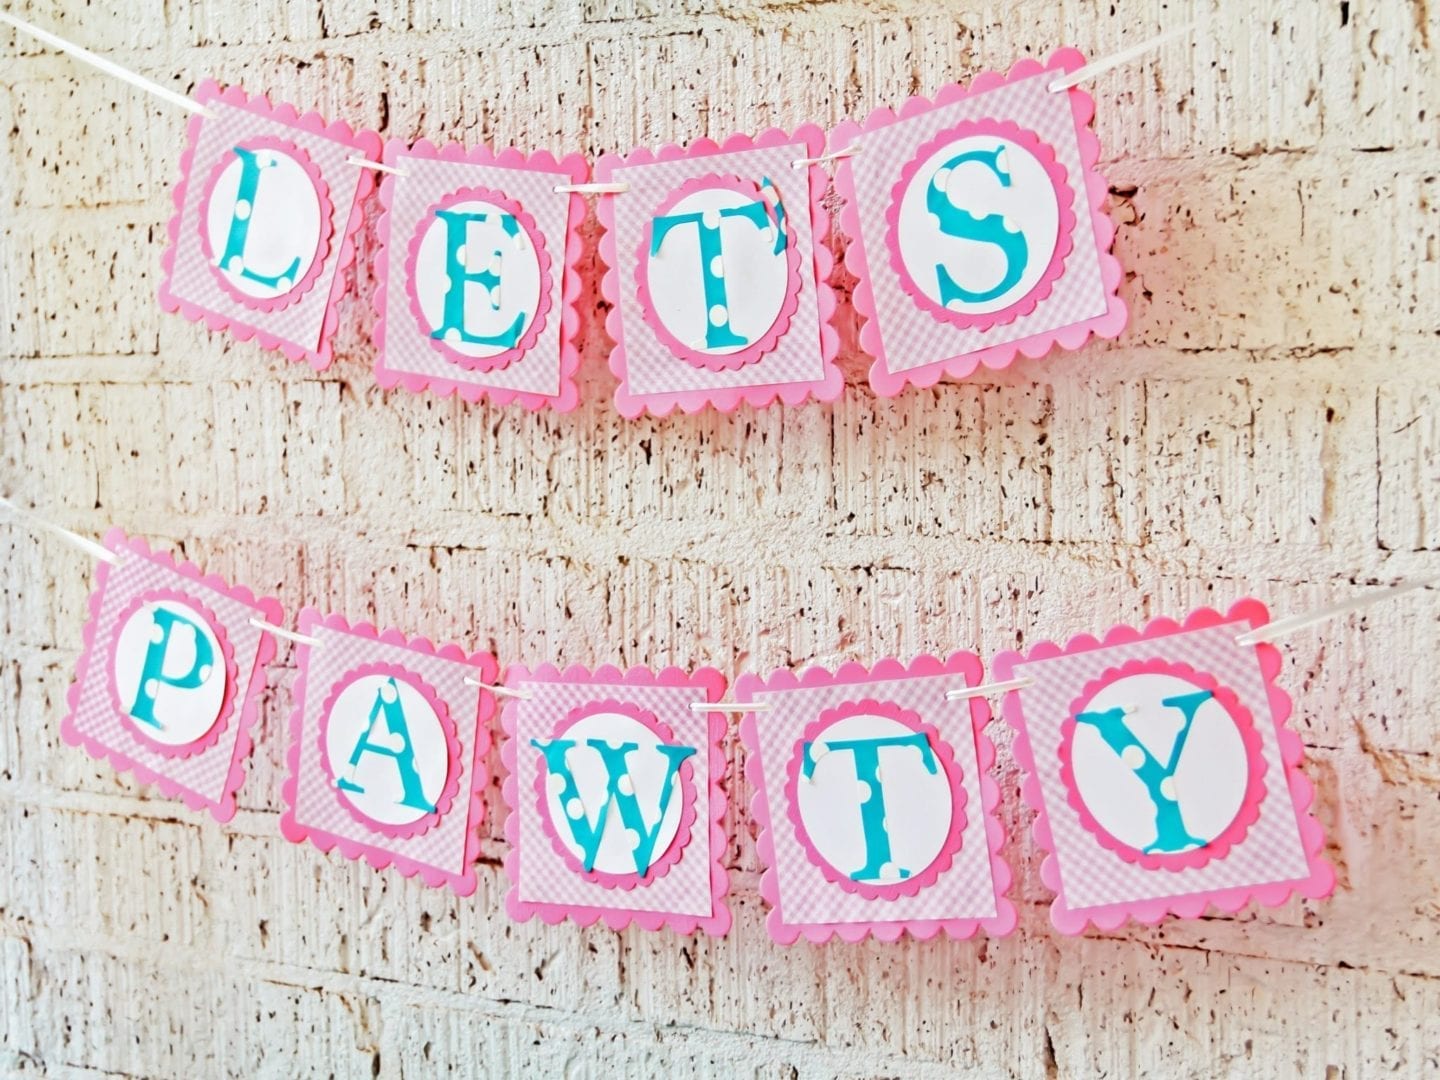 Let's Pawty cat party banner